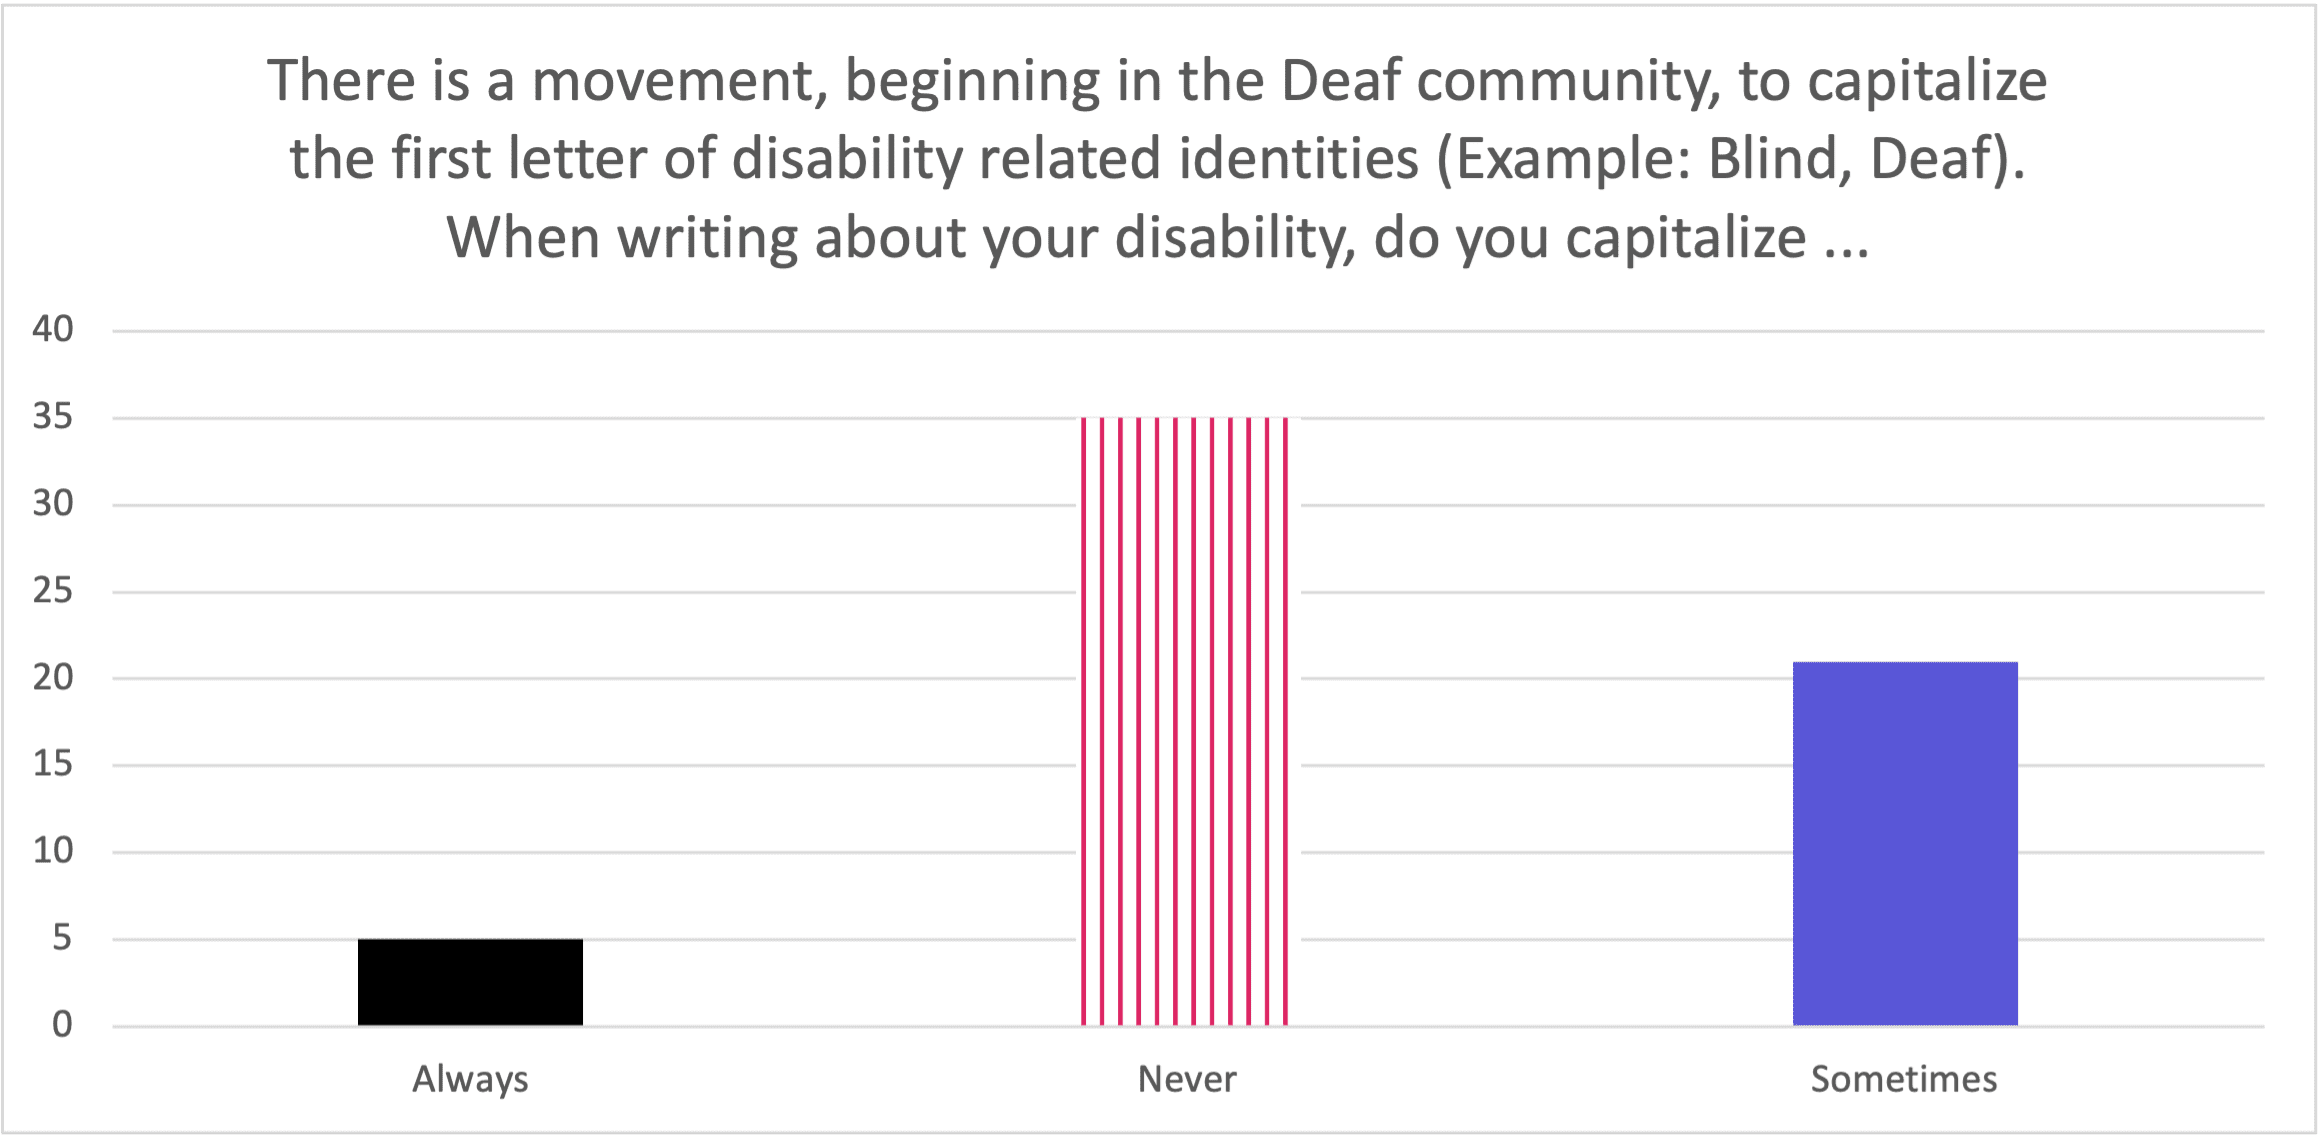 There is a movement, beginning in the Deaf community, to capitalize the first letter of disability related identities (Example: Blind, Deaf). When writing about your disability, do you capitalize ... always capitalize is low, never capitalize is the highest, and sometimes capitalize is in the middle for respondents..